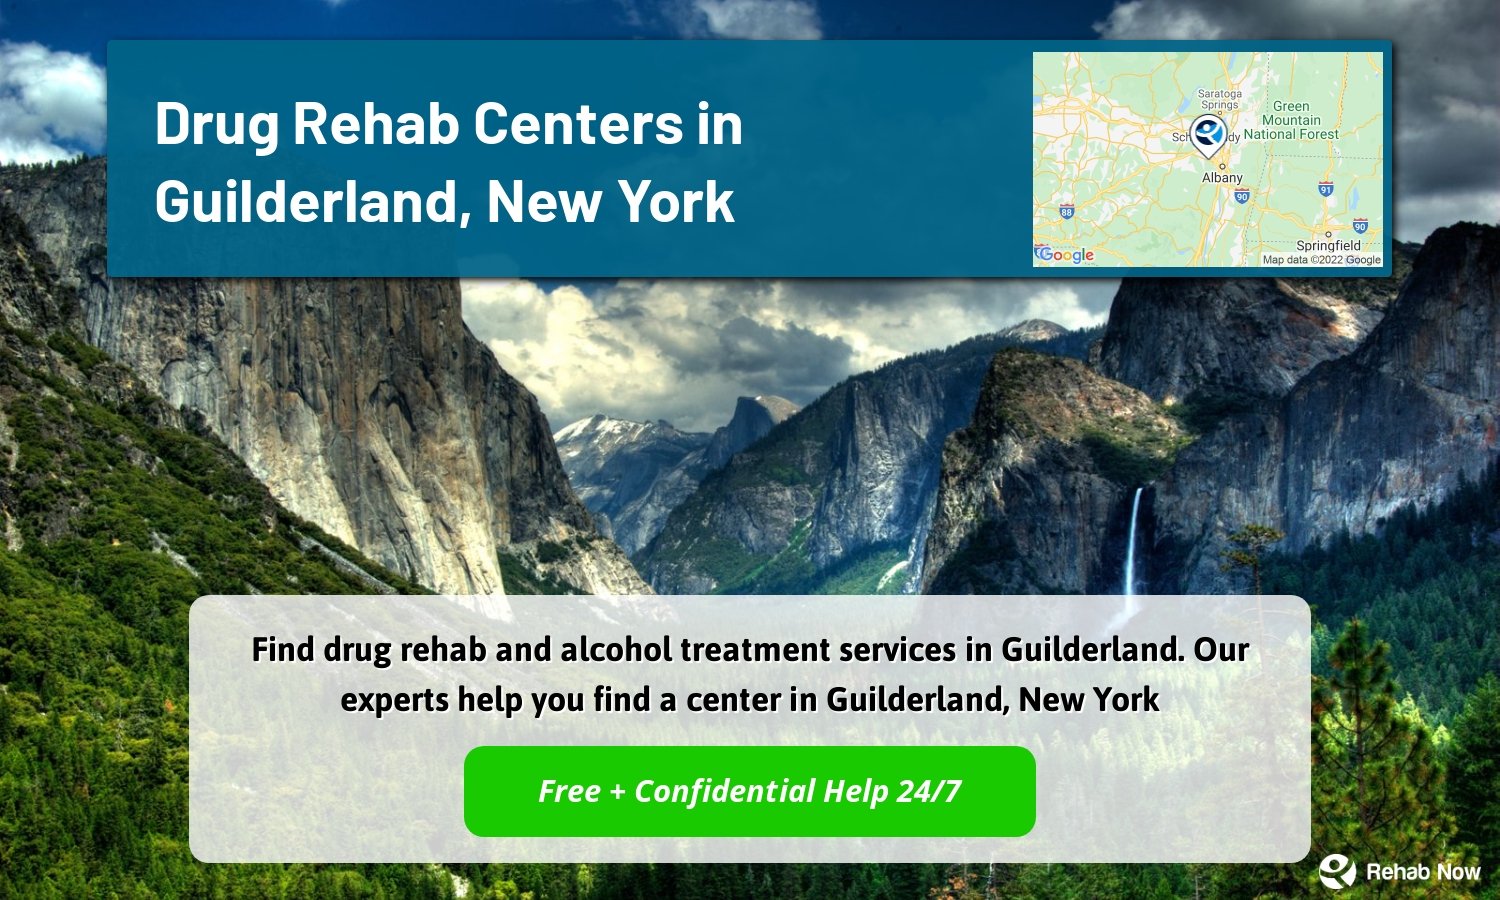 Find drug rehab and alcohol treatment services in Guilderland. Our experts help you find a center in Guilderland, New York